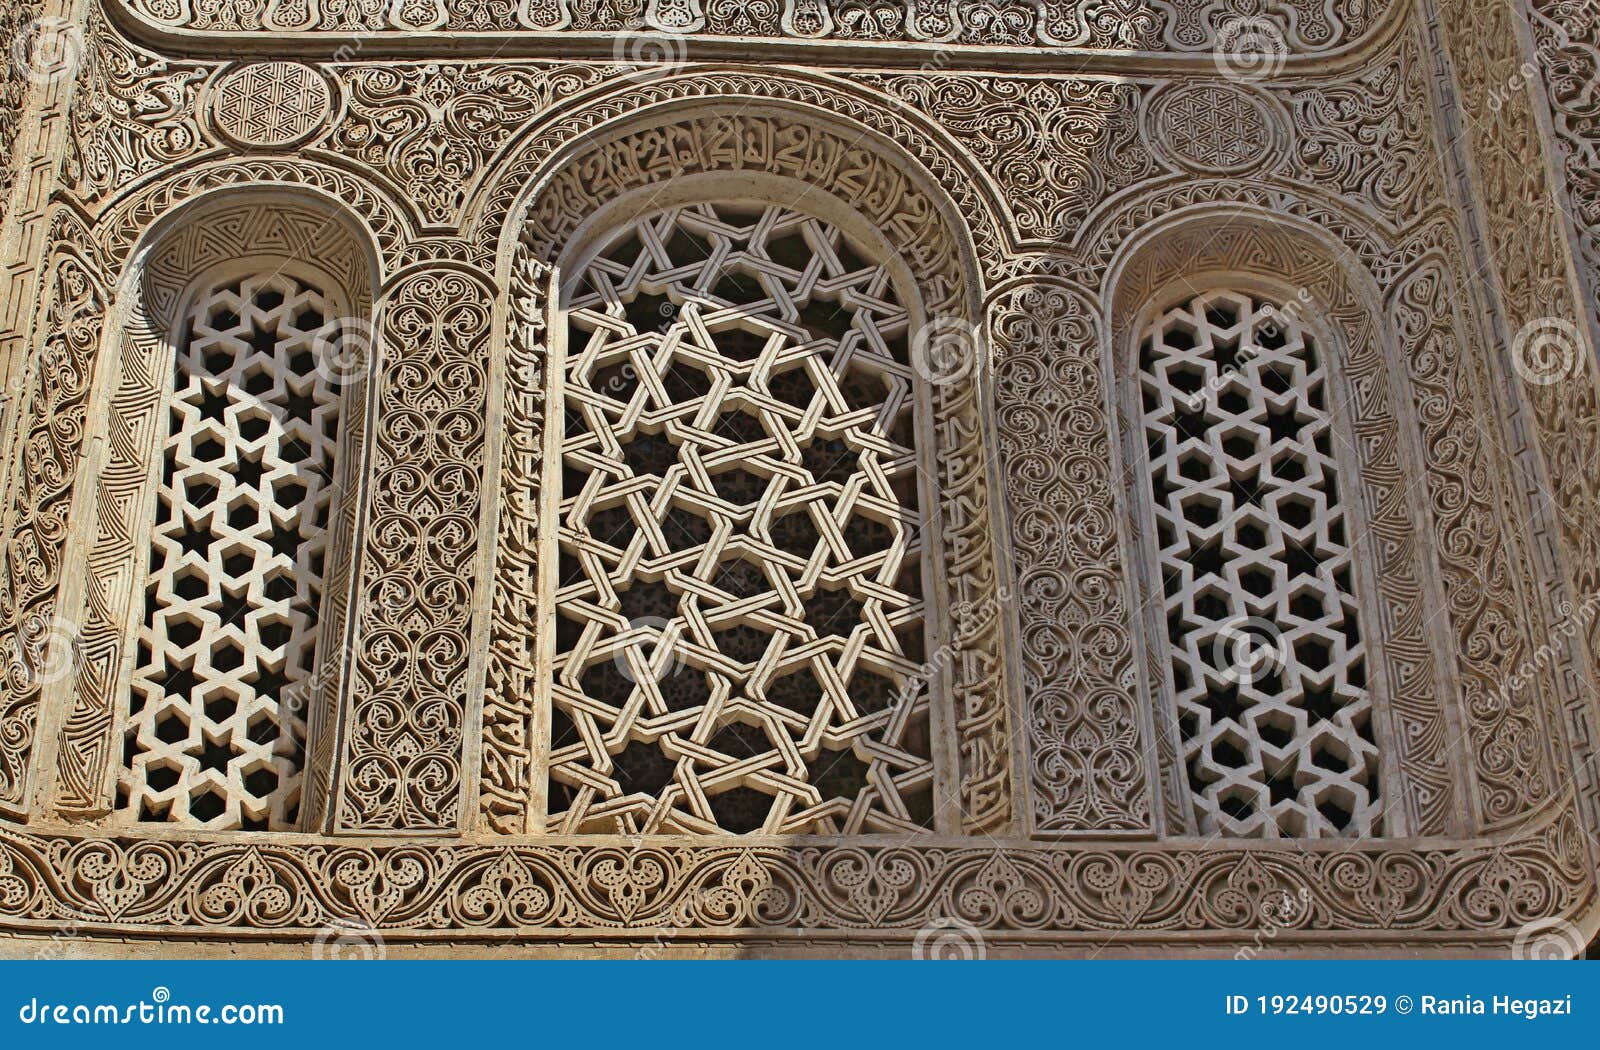 a beautifully ed window from sultan qalawun complex